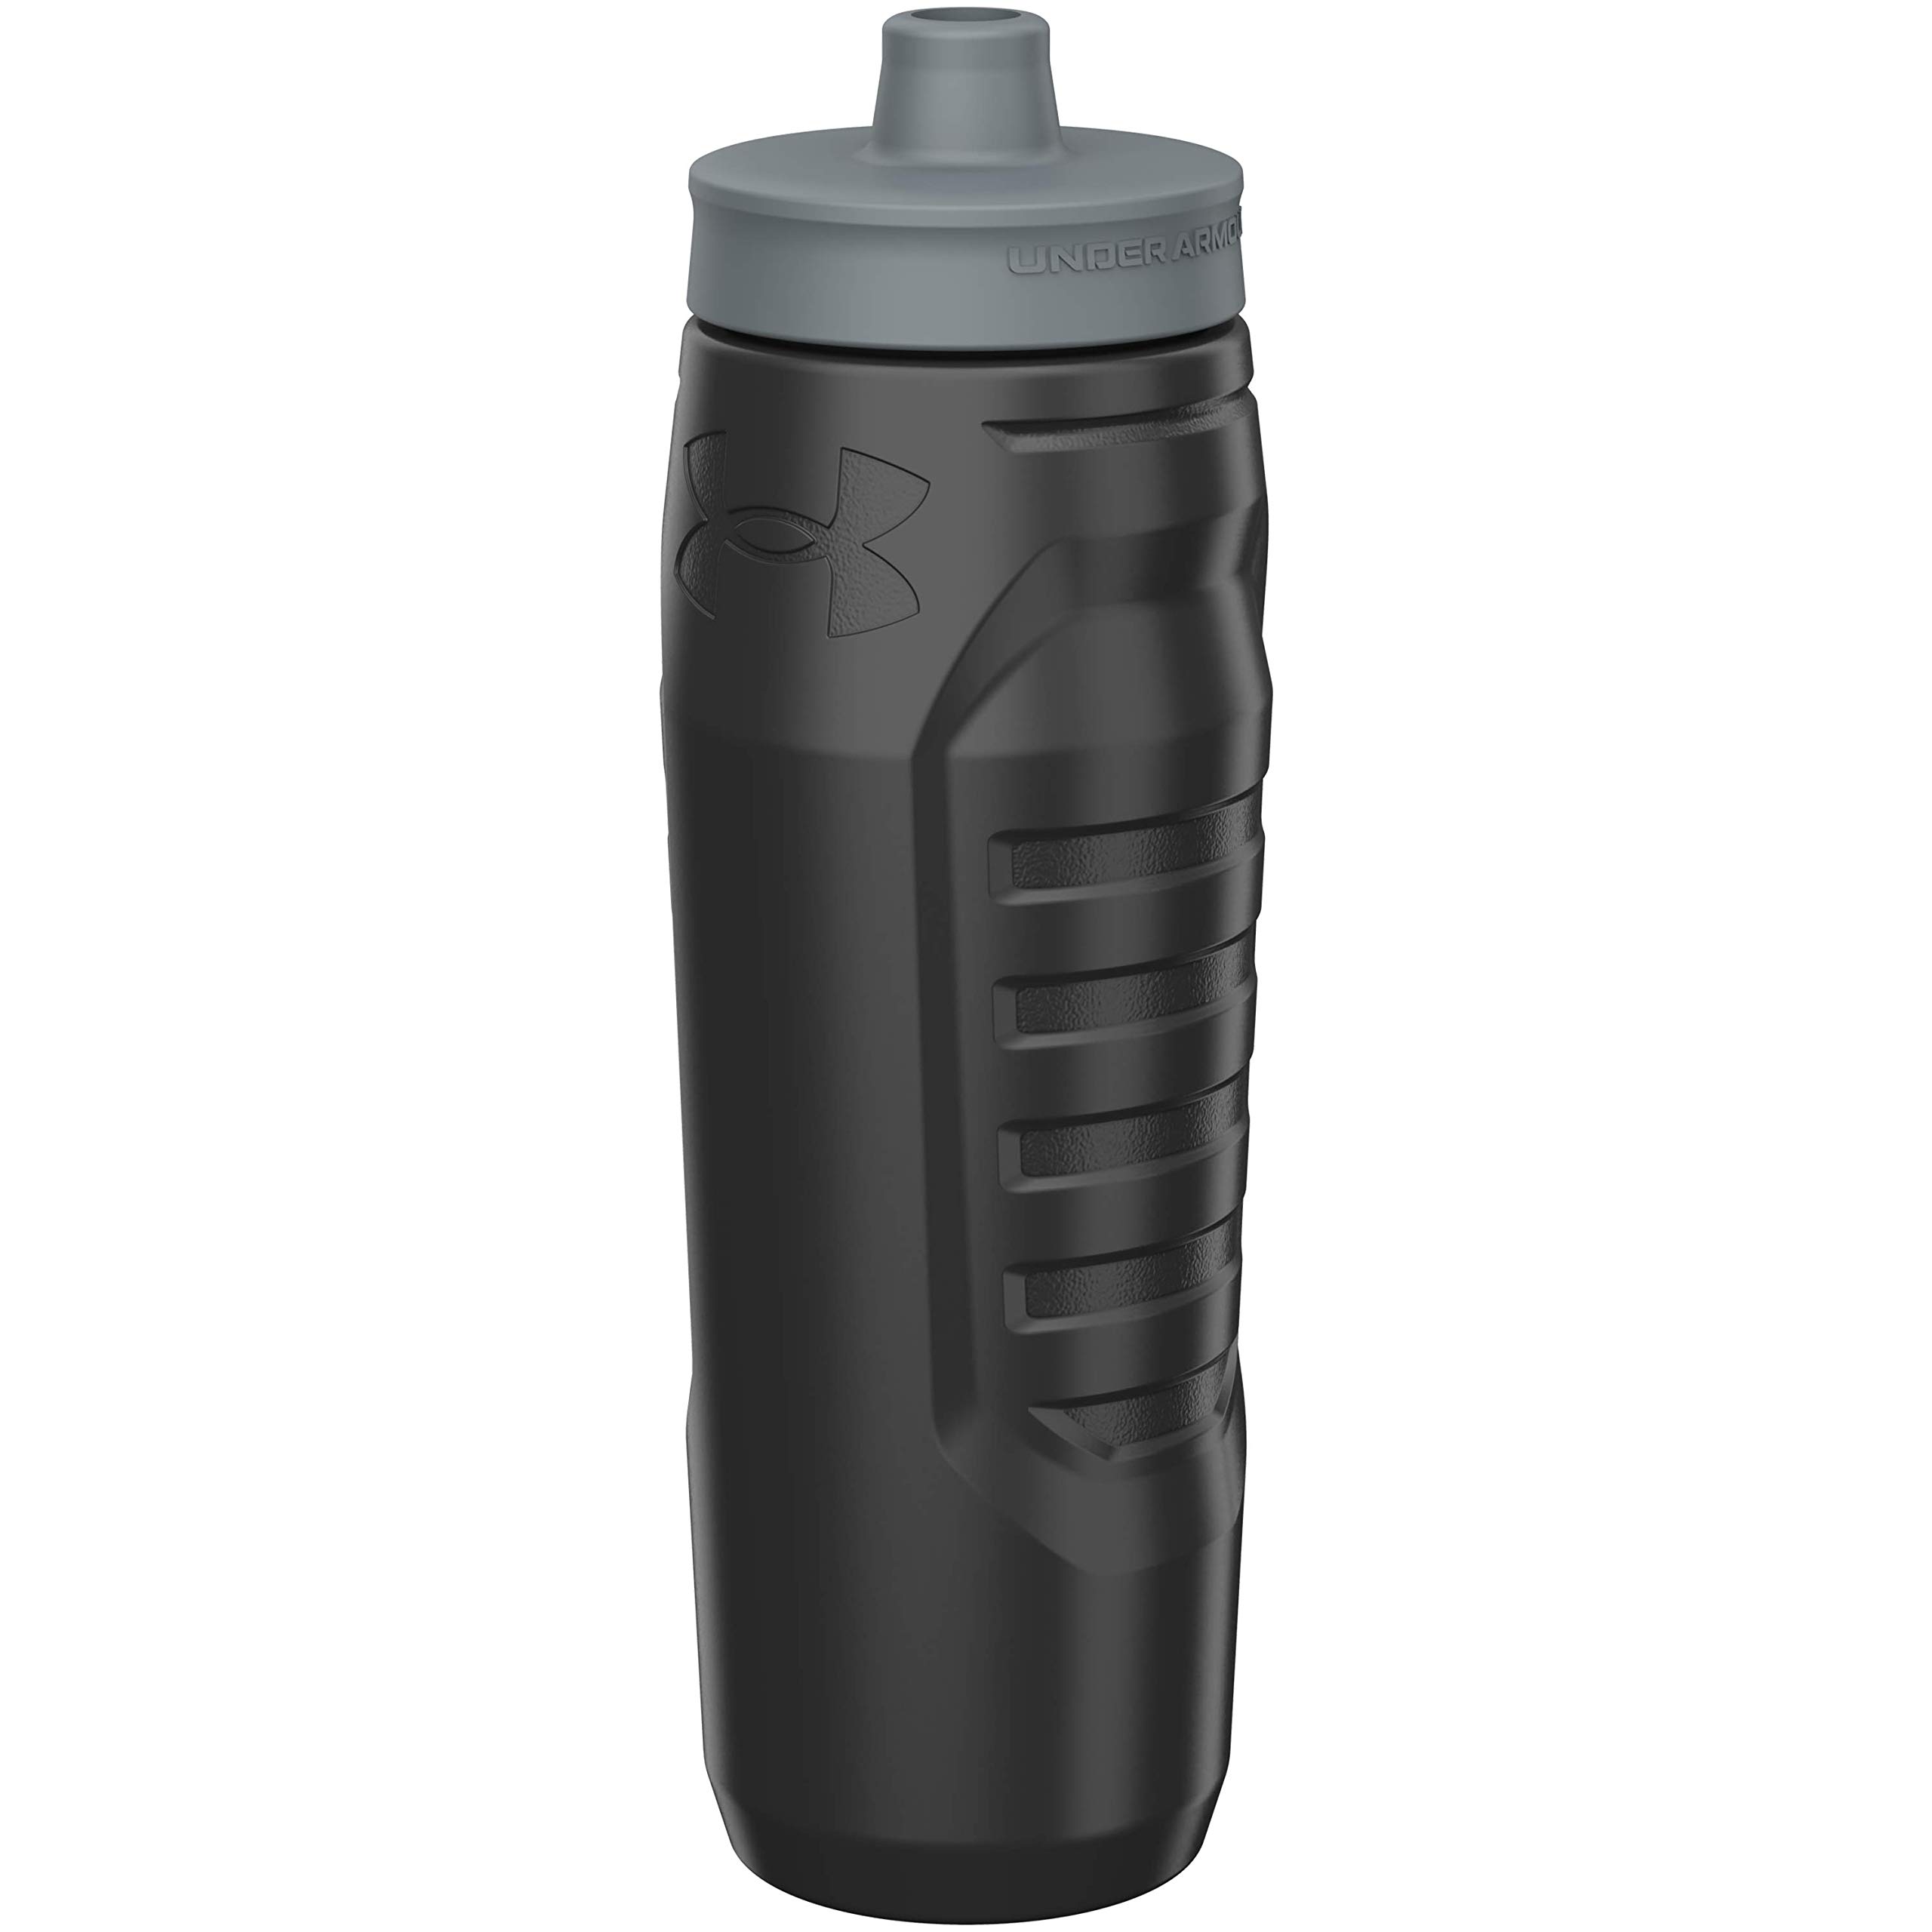 32-Oz Under Armour Sideline Squeezable Water Bottle (Black, Royal or White) $5.40 + Free Shipping w/ Prime or on $35+